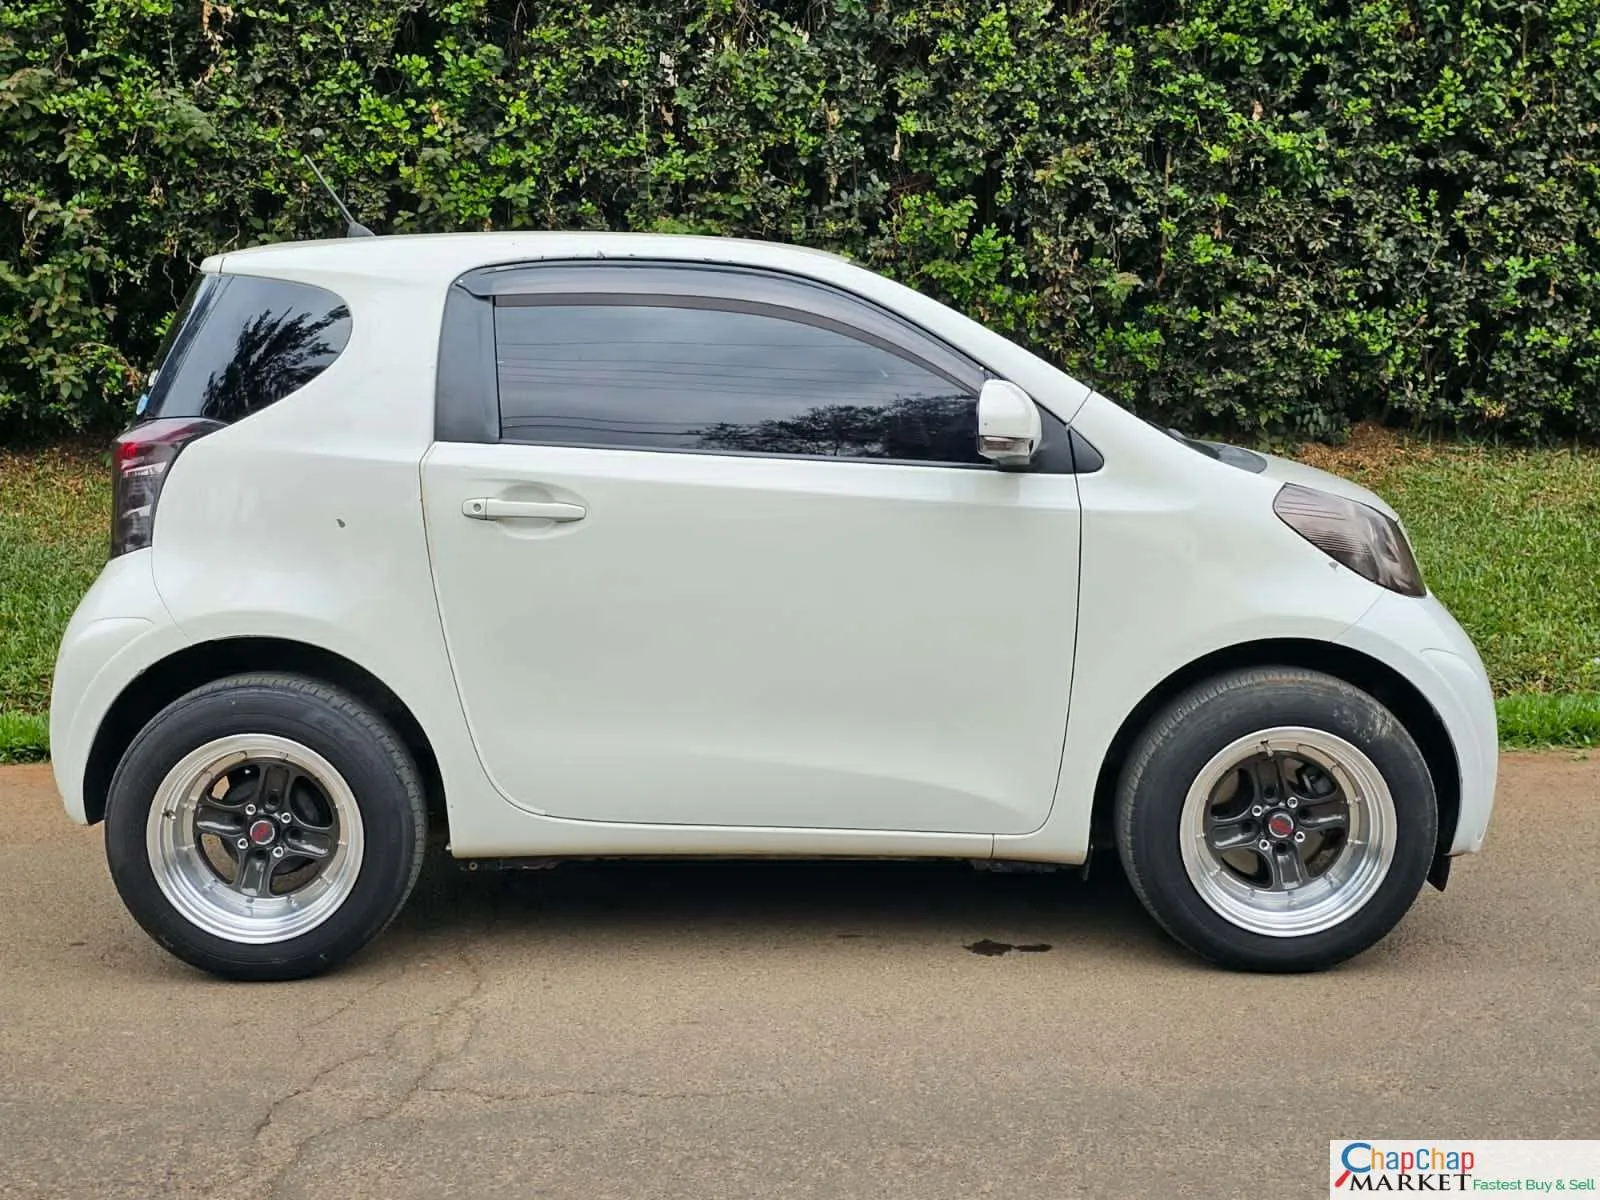 Toyota IQ for sale in Kenya You Pay 30% Deposit Trade in OK EXCLUSIVE